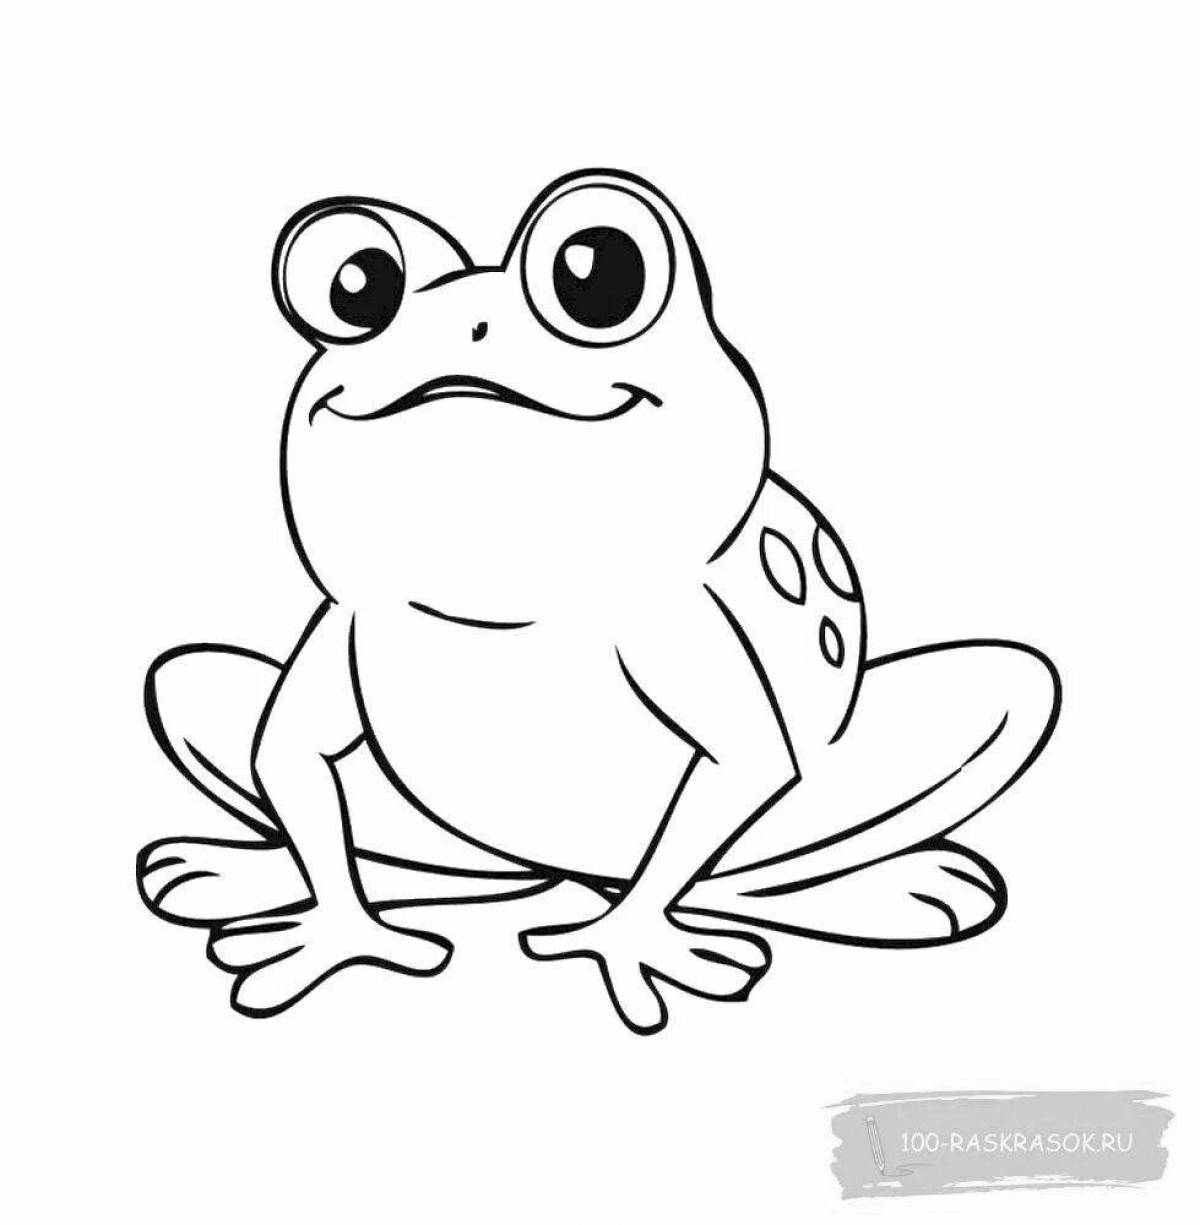 Charming coloring cute frog